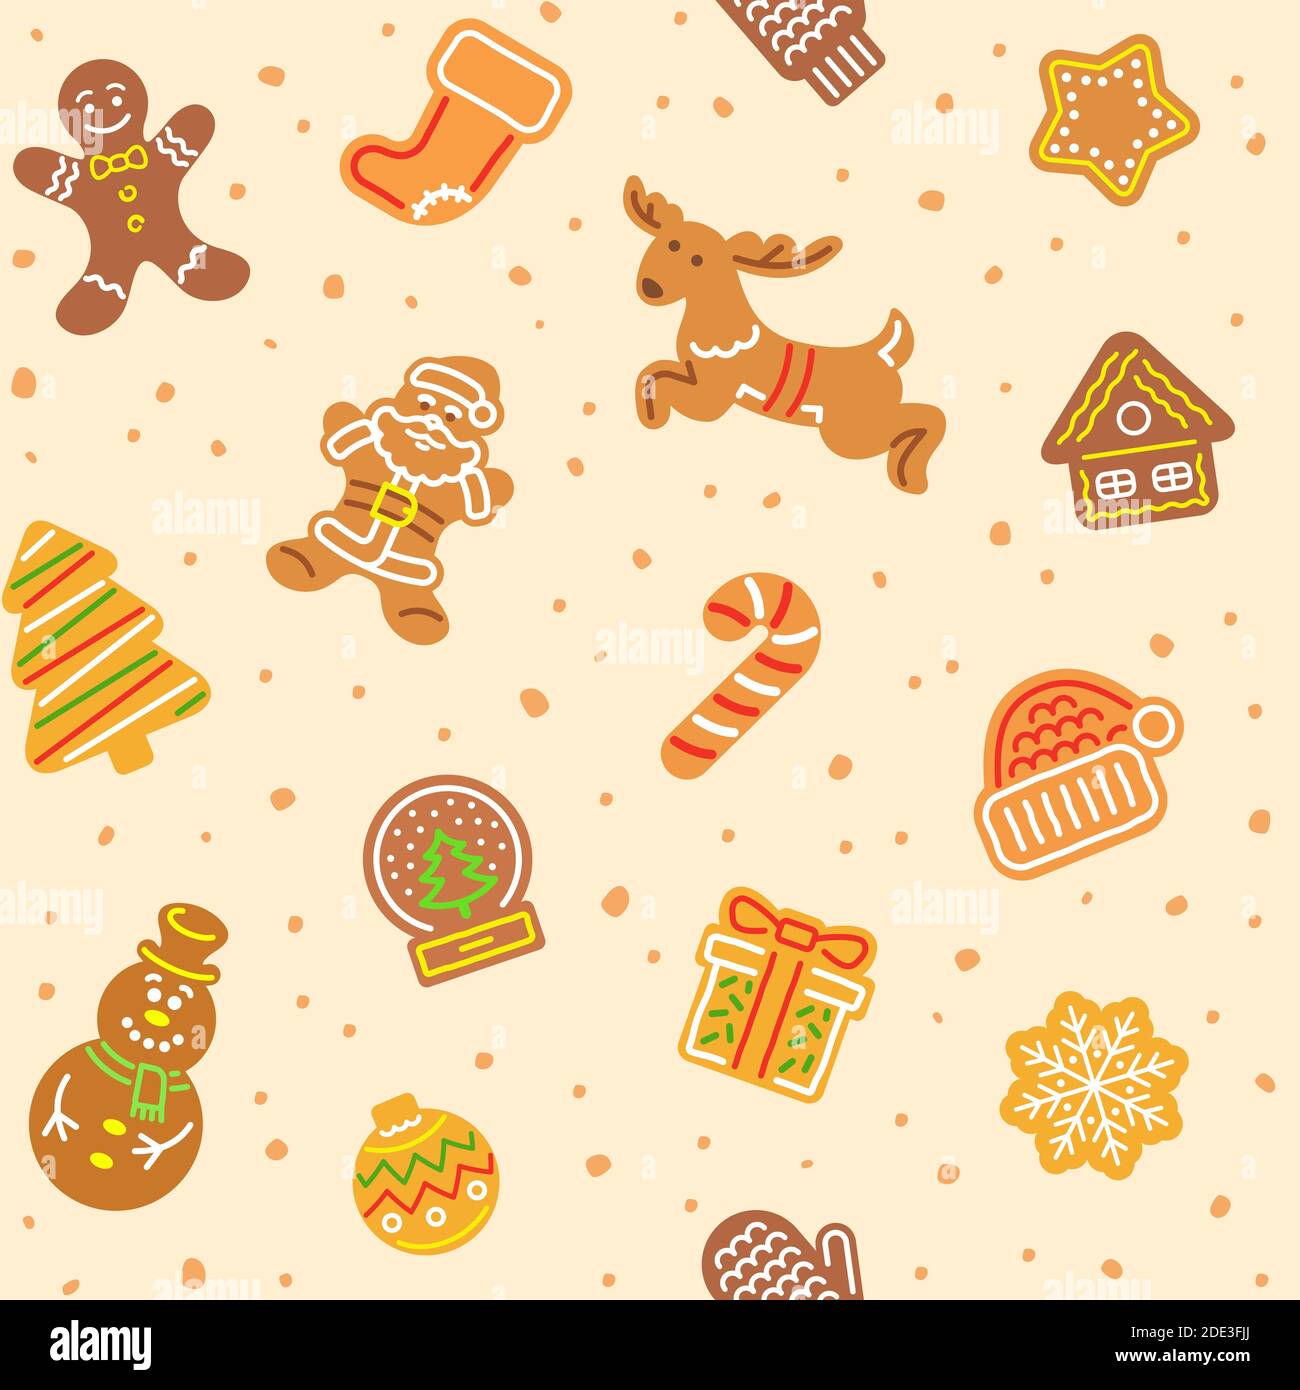 Christmas gingerbread cookies seamless vector pattern. Simple icons of gingerbread man, Santa Claus, deer, snowflake, snowman and other holiday symbol Stock Vector